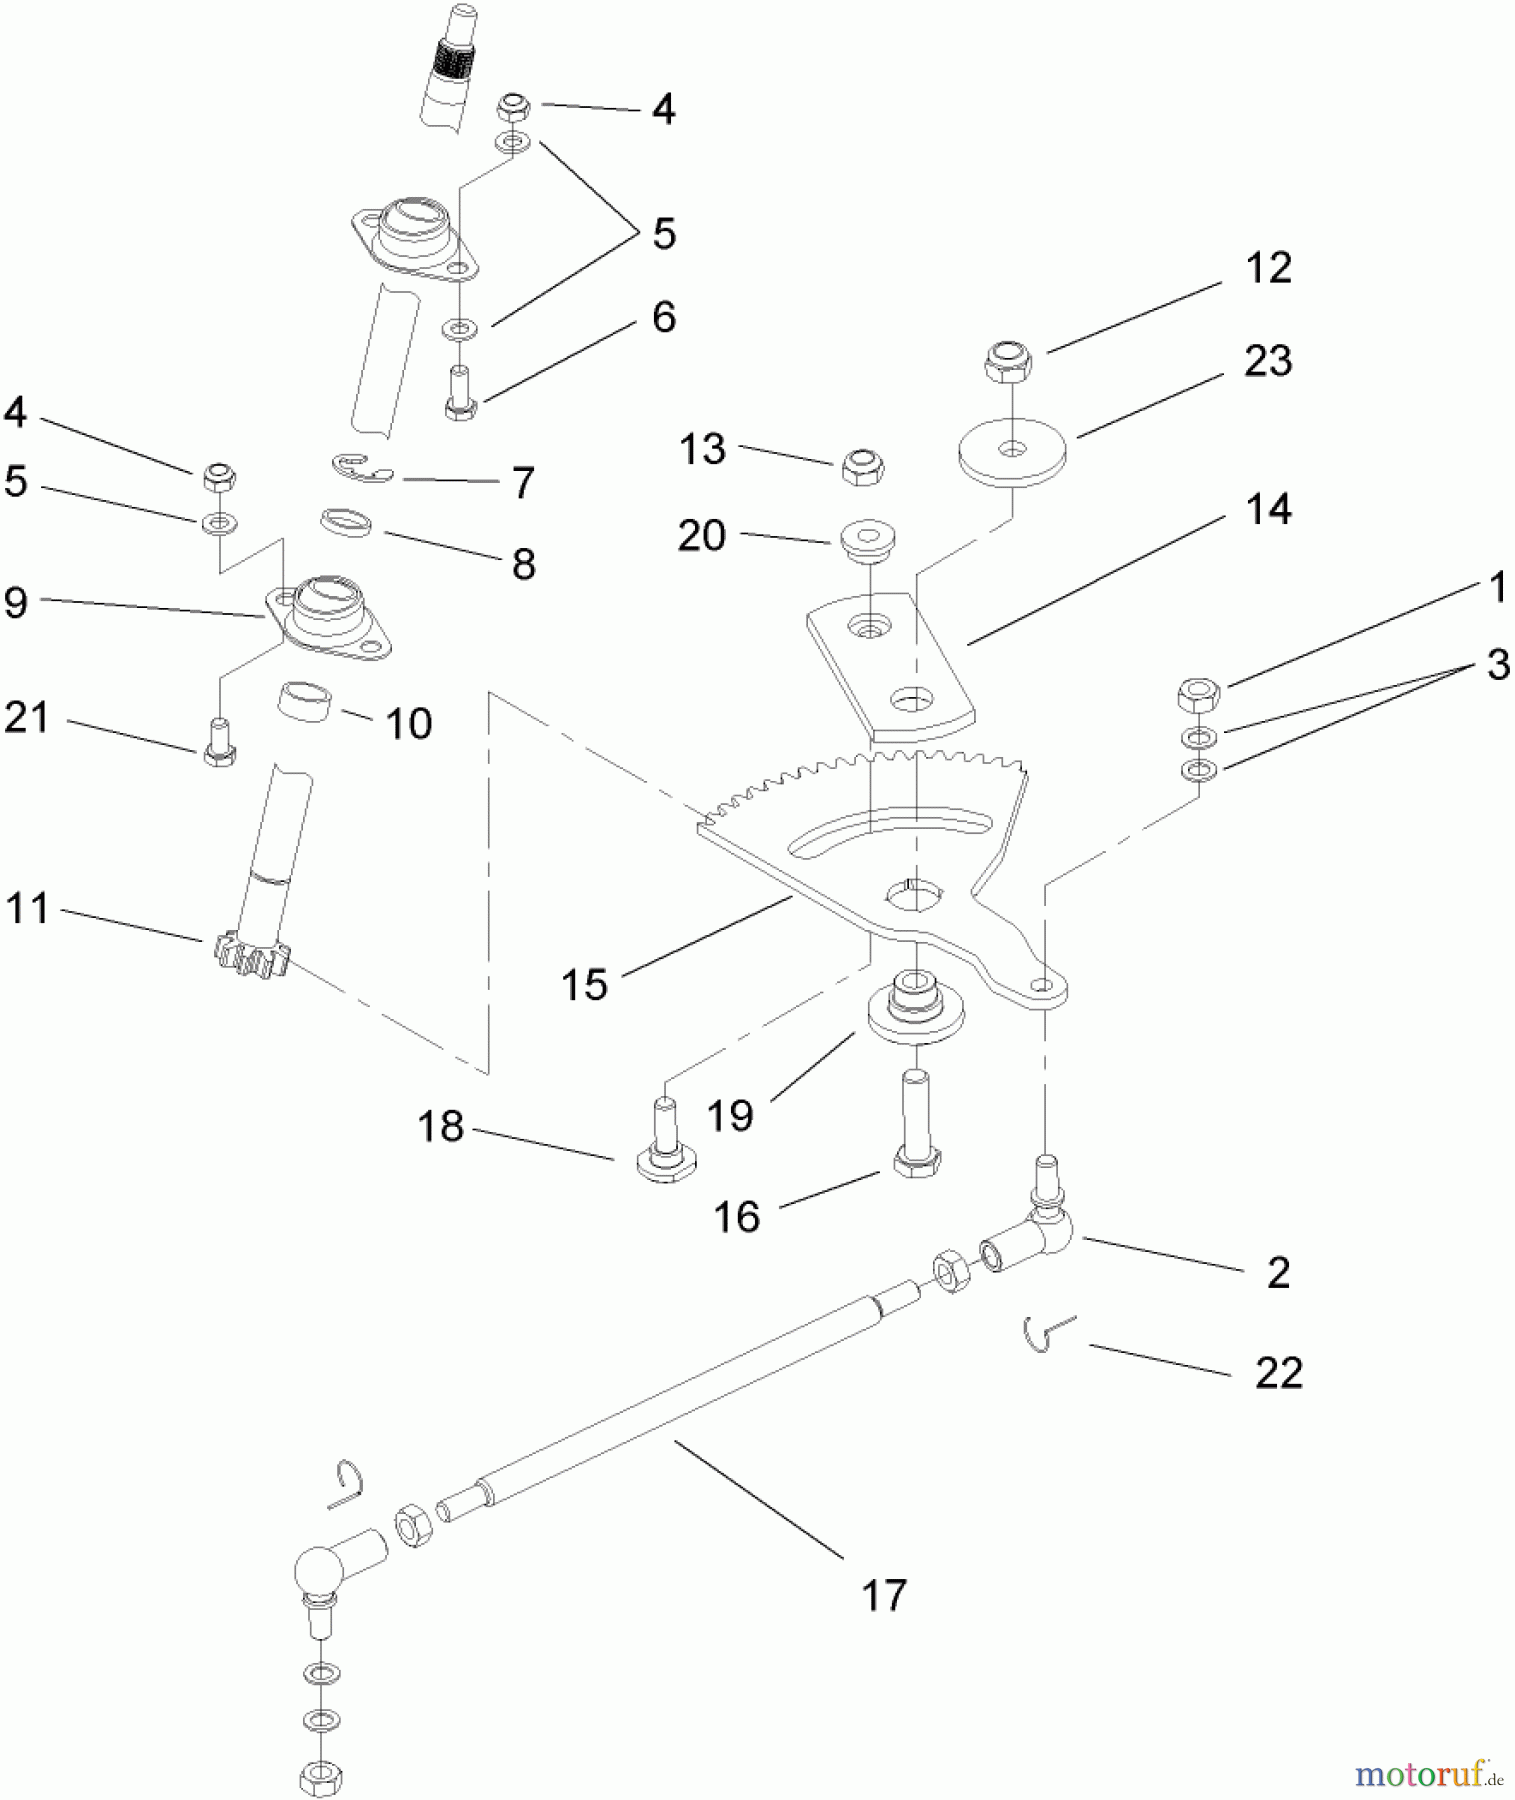  Toro Neu Mowers, Lawn & Garden Tractor Seite 1 74573 (DH 200) - Toro DH 200 Lawn Tractor, 2009 (290000001-290000480) STEERING ASSEMBLY